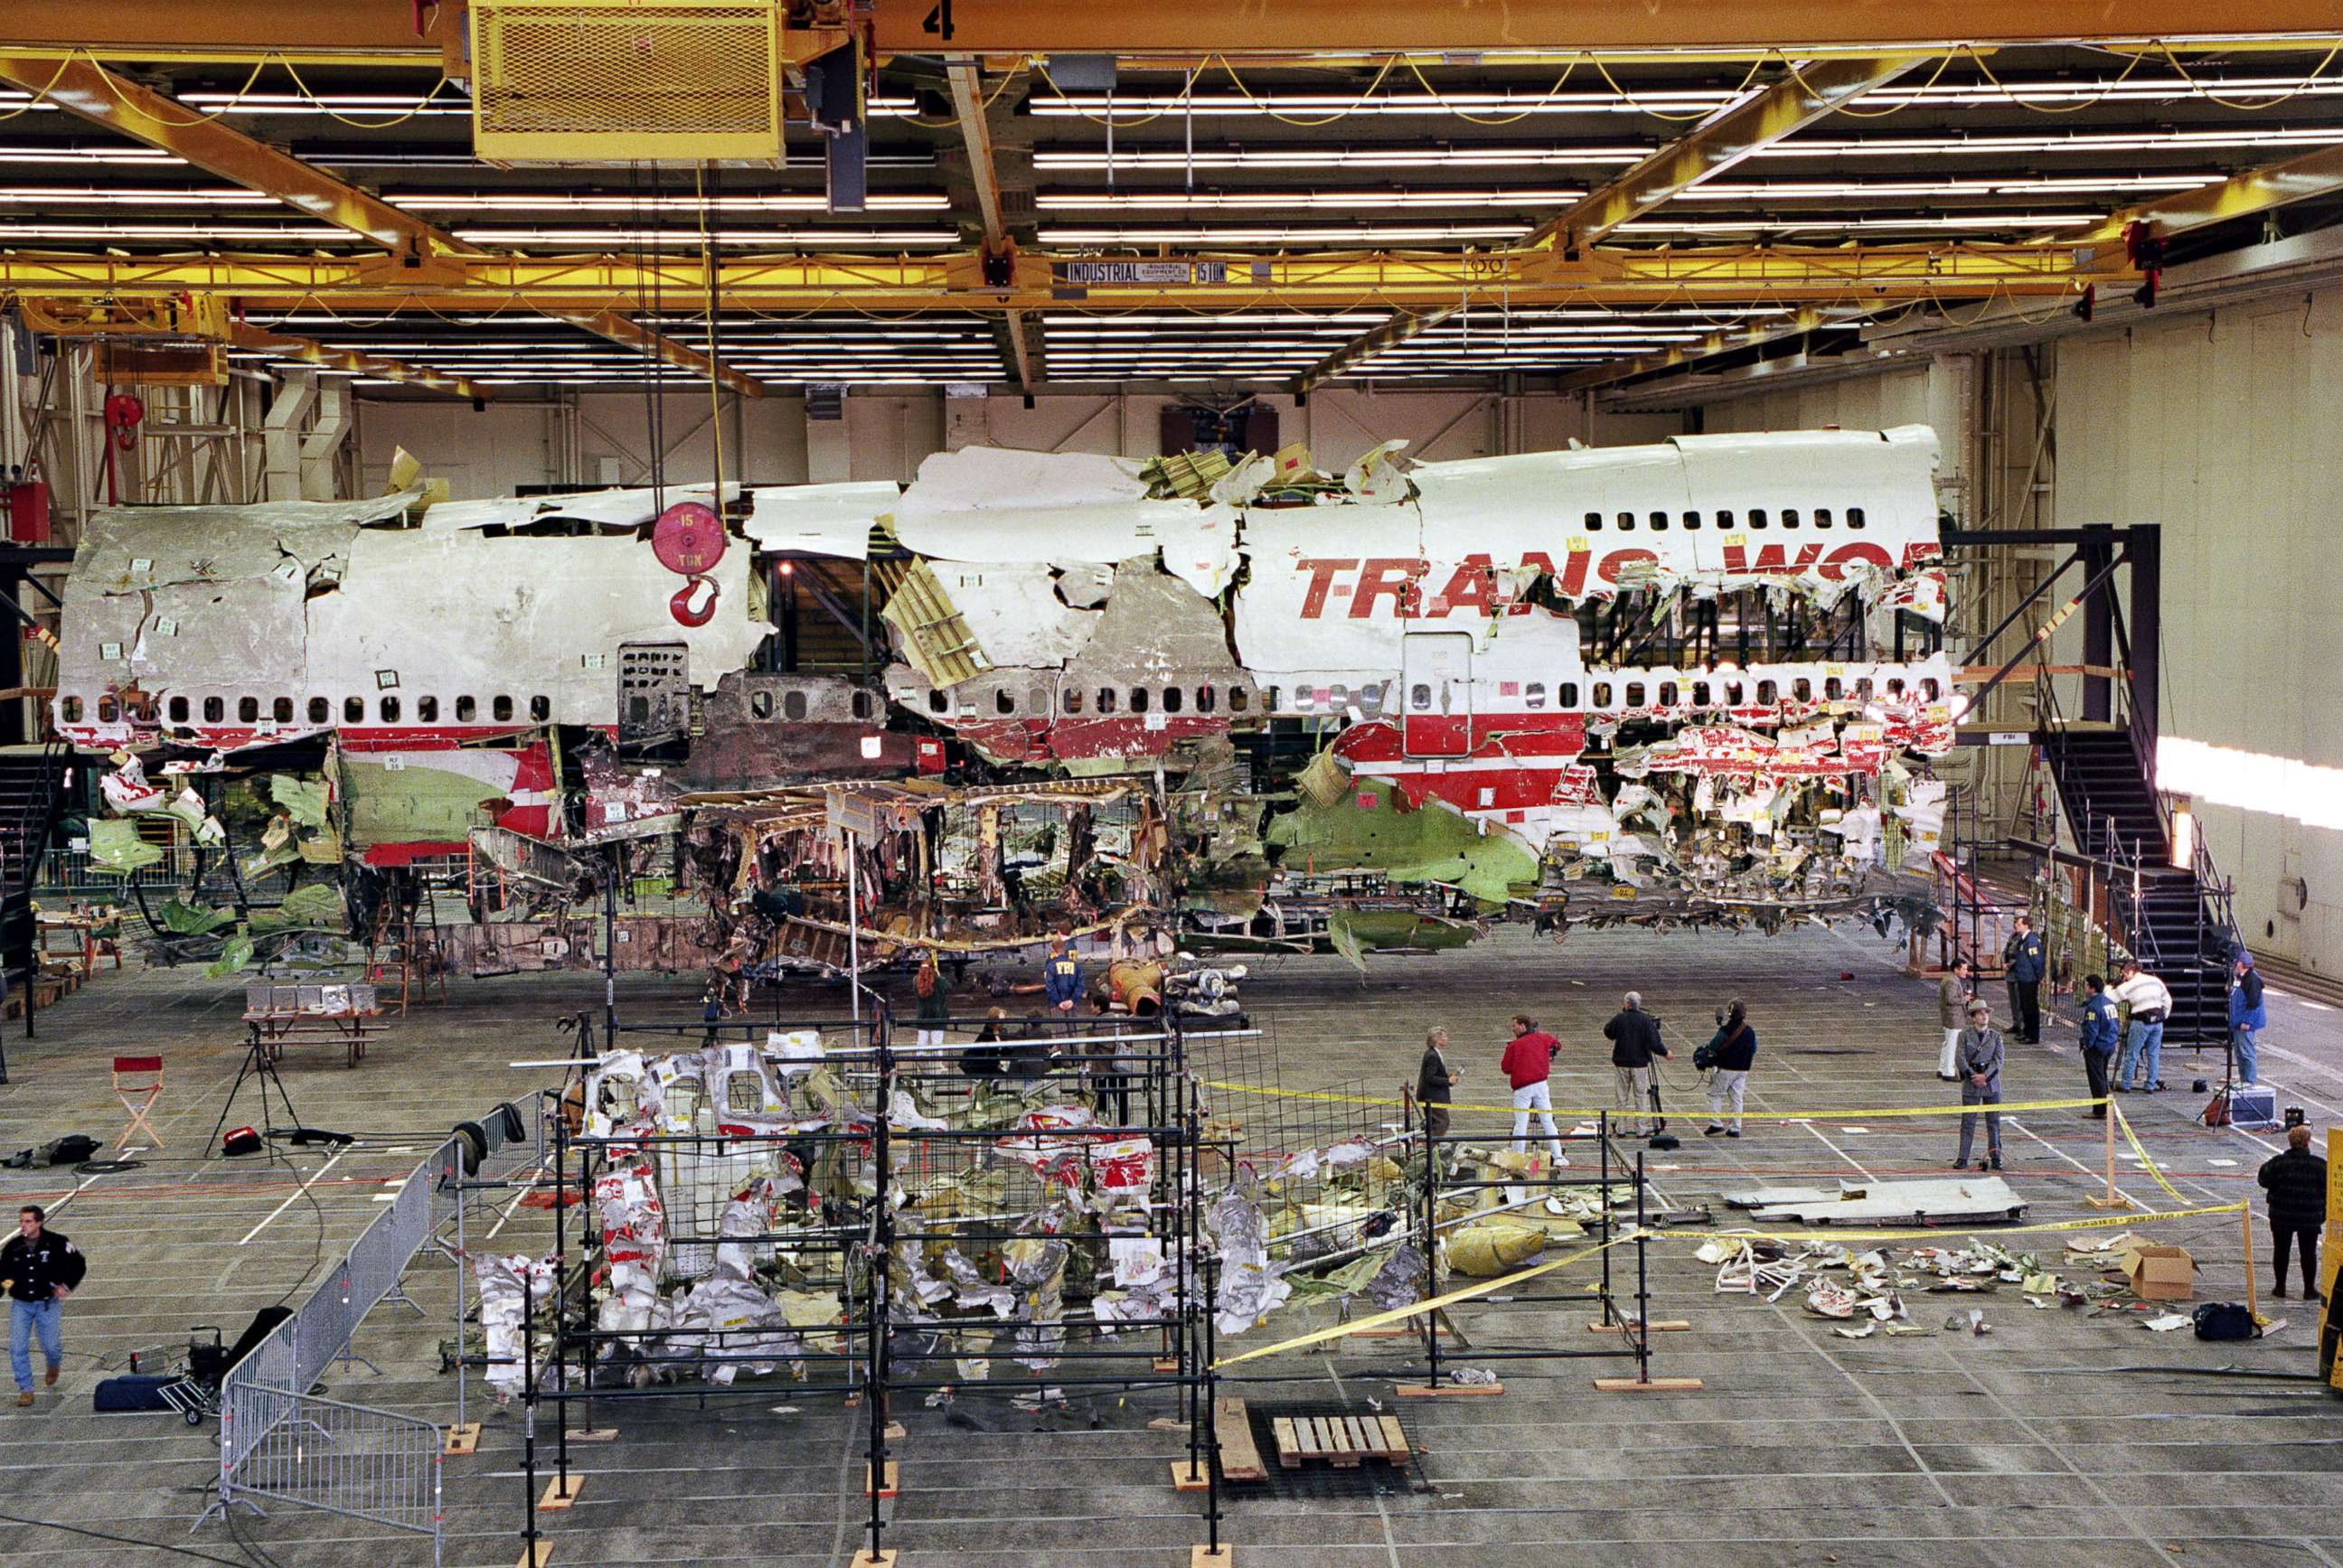 Wreckage of TWA Flight 800 to Be Decommissioned After Years of Training Use  – NBC New York